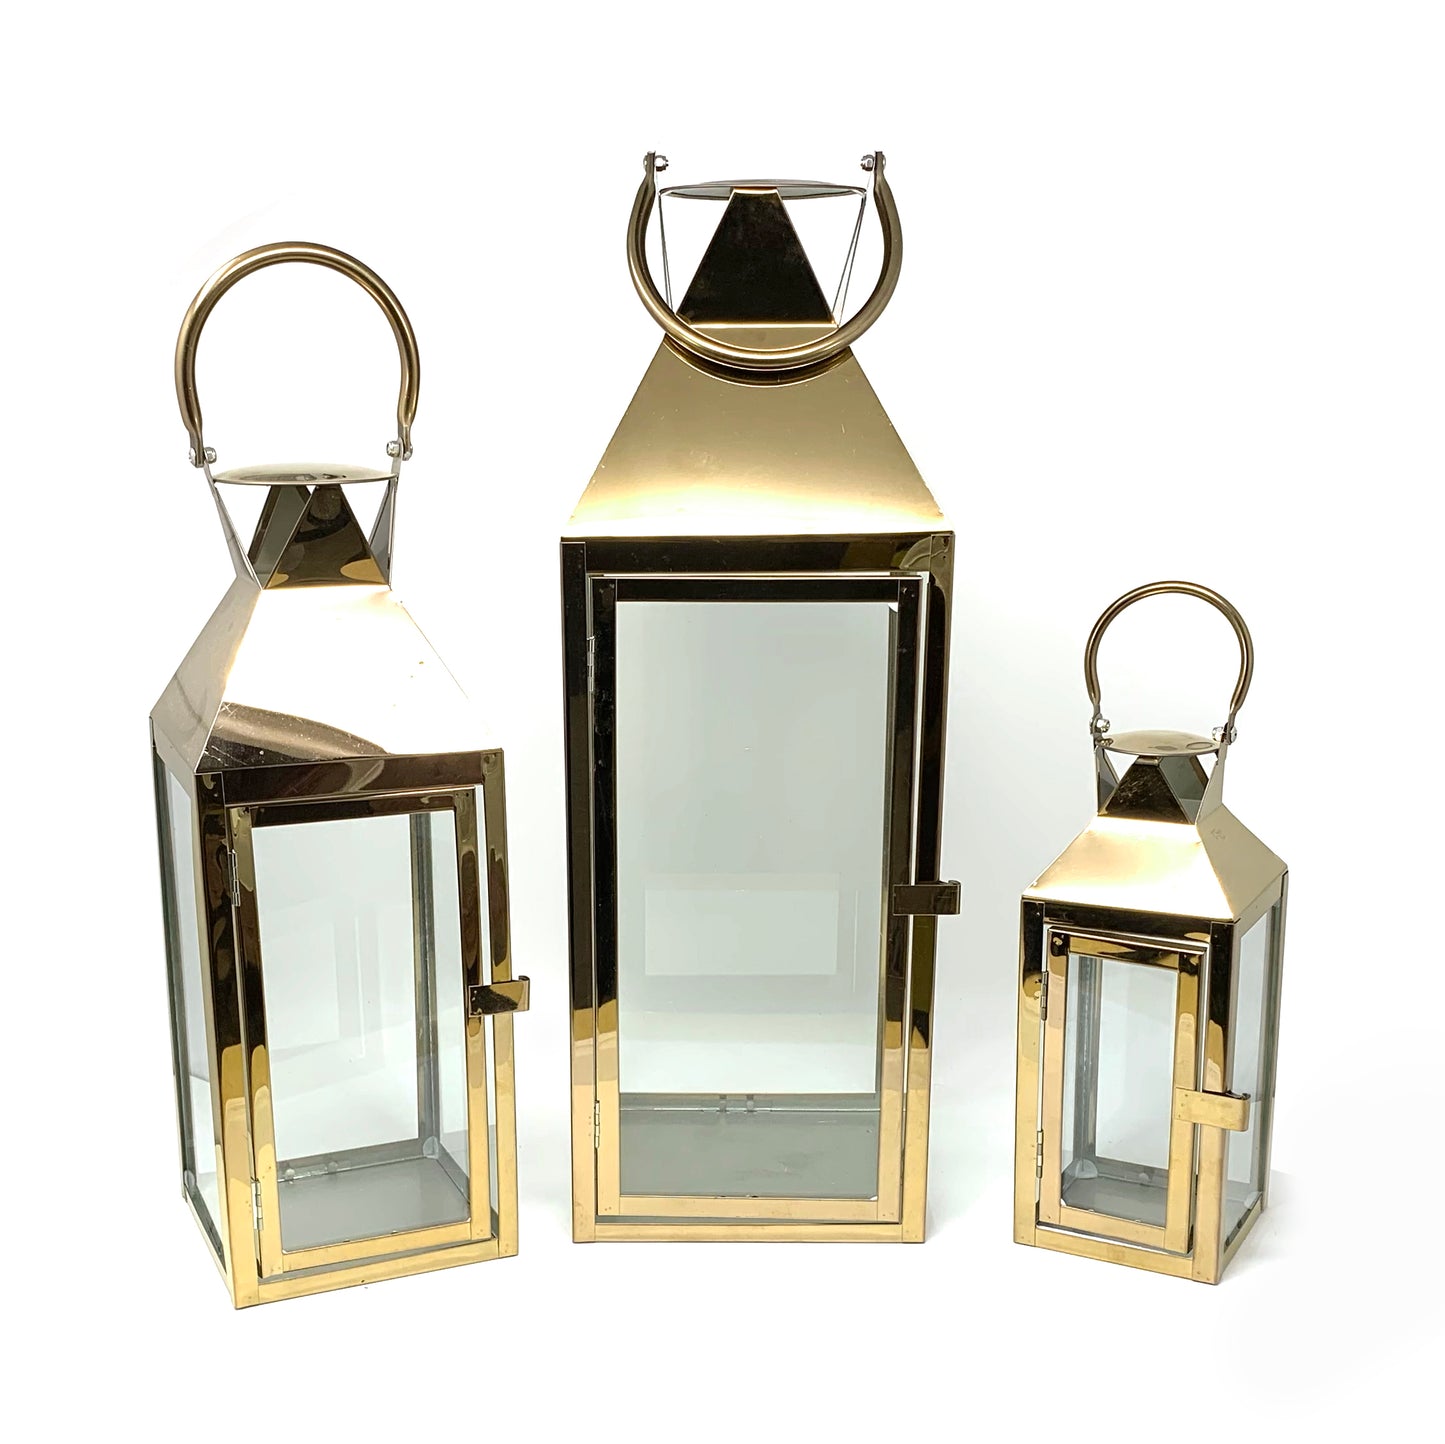 Allgala Lanterns 3-PC Set Jumbo Indoor/Outdoor Hurricane Candle Lantern Set with Chrome Plated Structure and Tempered Glass-Pyramid Top